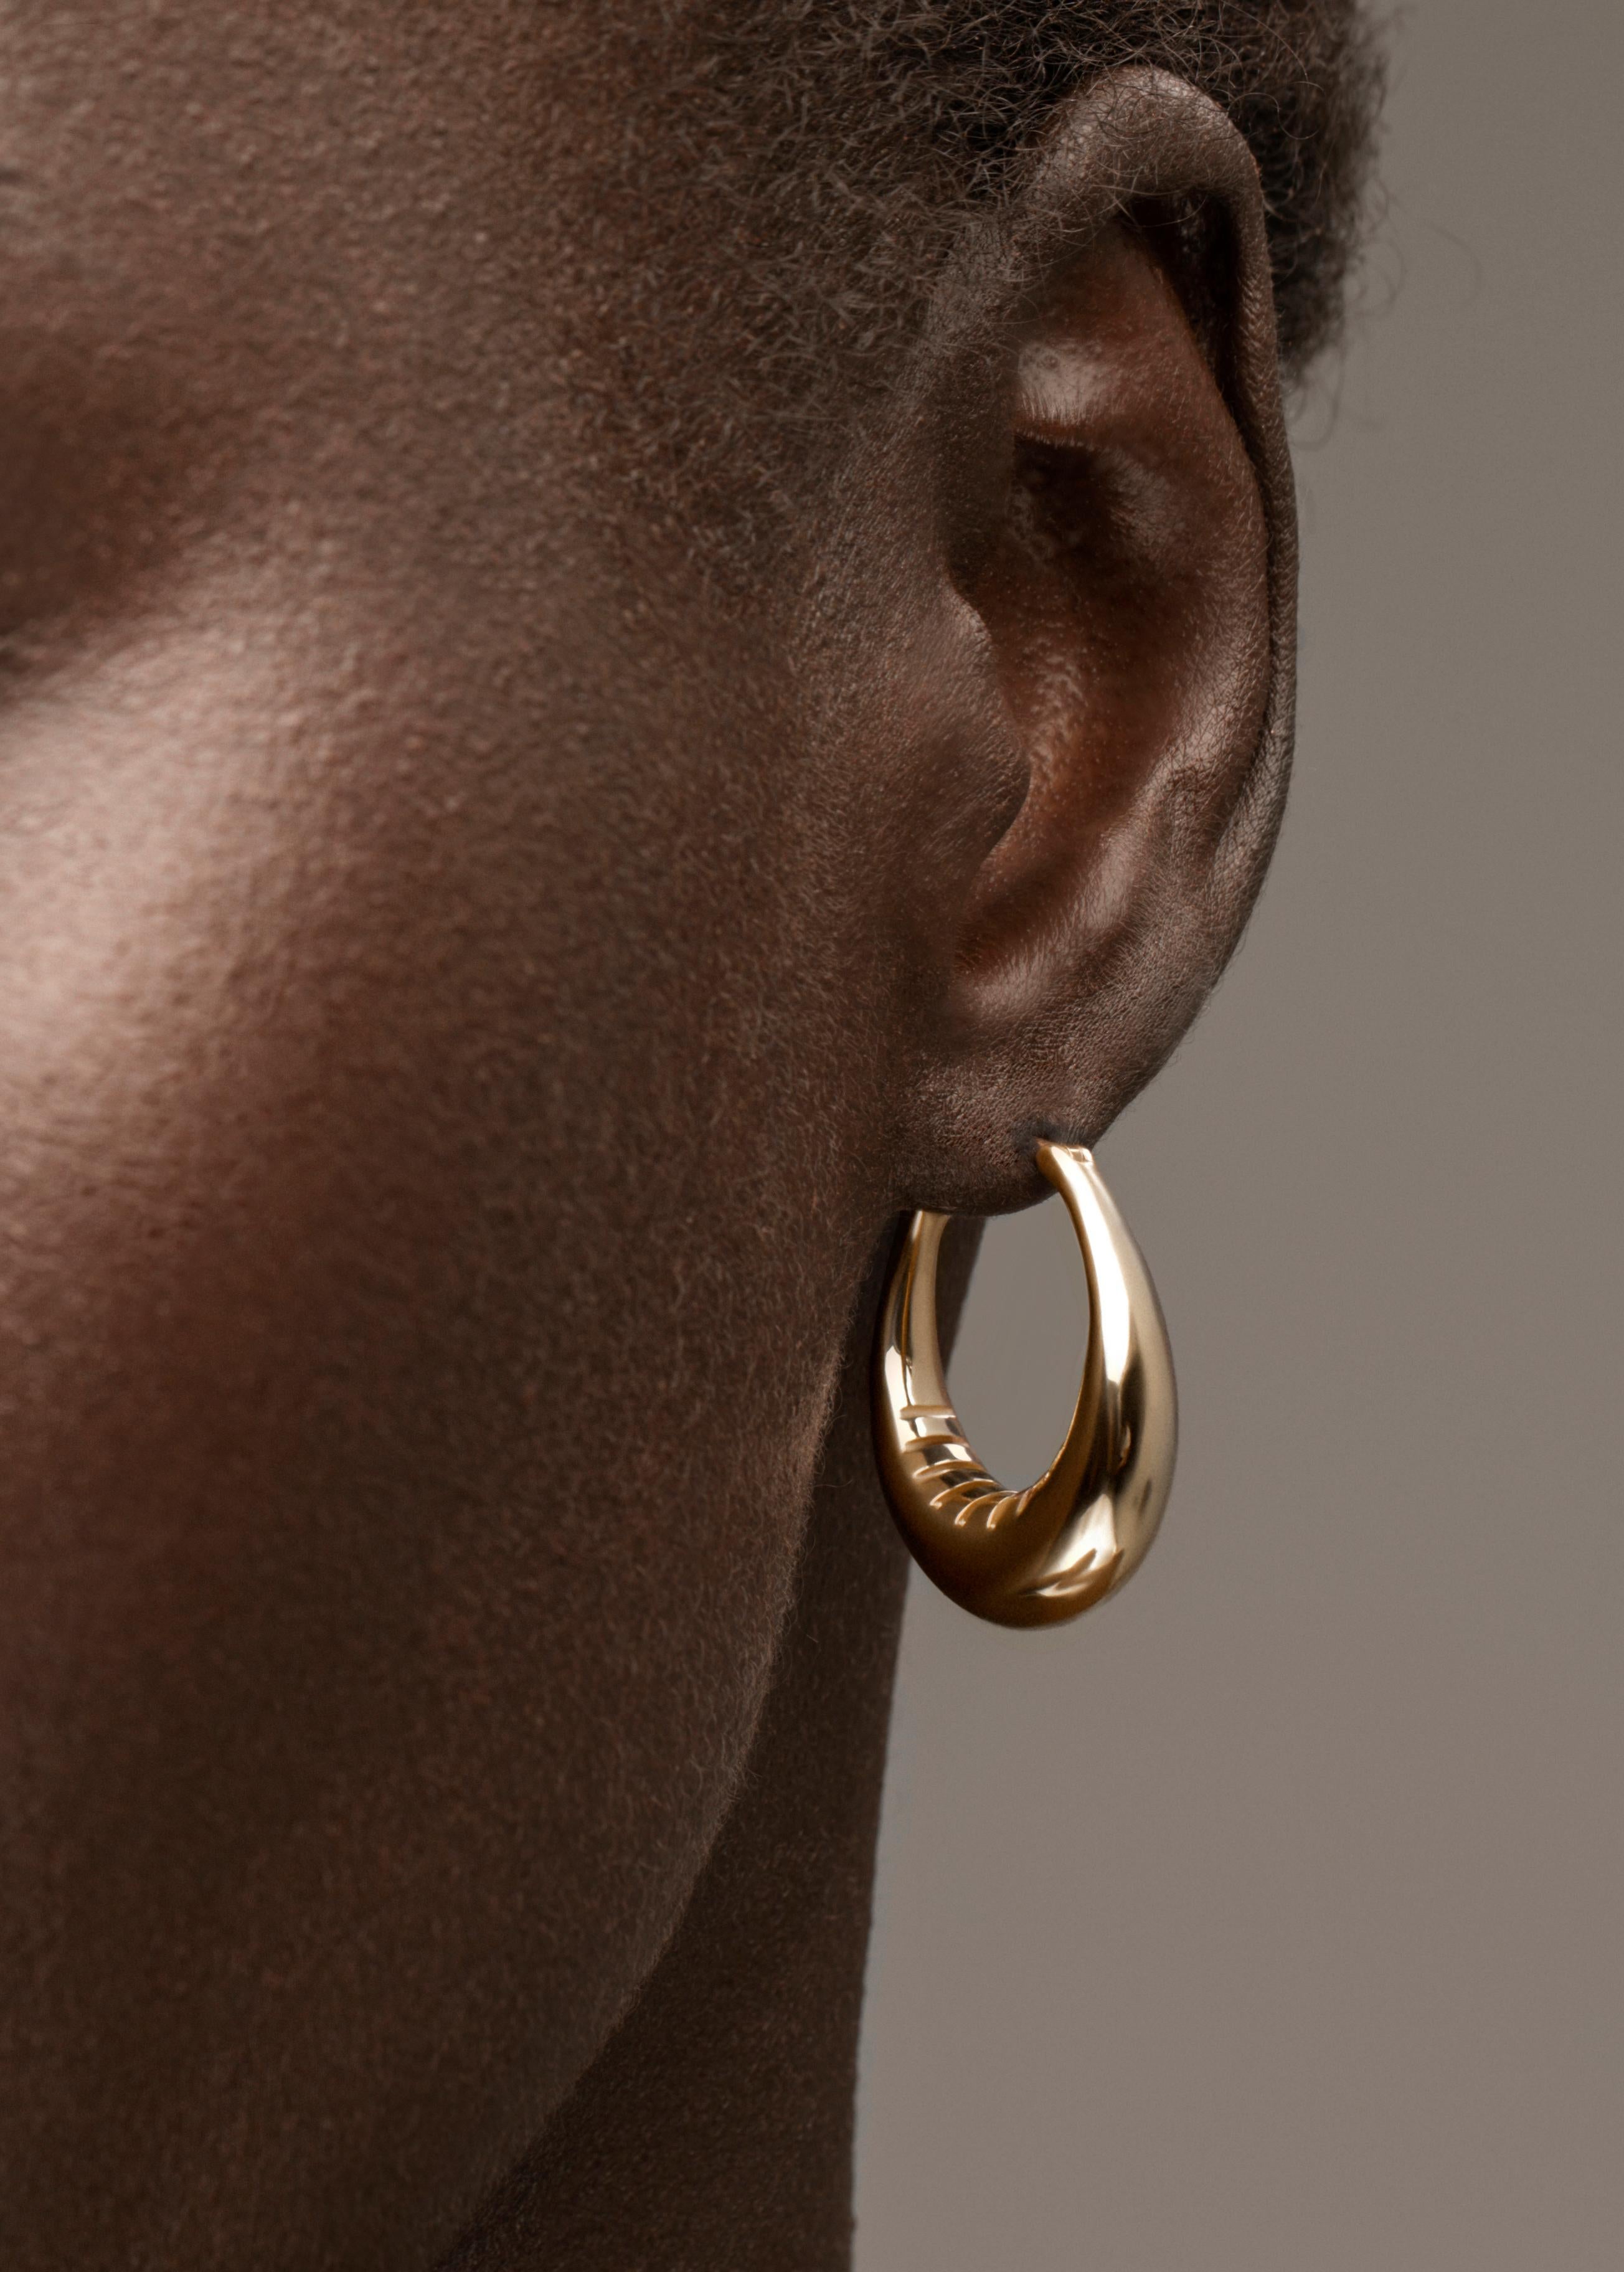 Voluminous Reflective hoops with a stunning interior grille detail. You’ll never want to take these off.

Handcrafted in NYC with 18kt certified Fairmined Ecological gold that is toxic chemical free, sustainable, ethical and clean.

Please allow 3-4